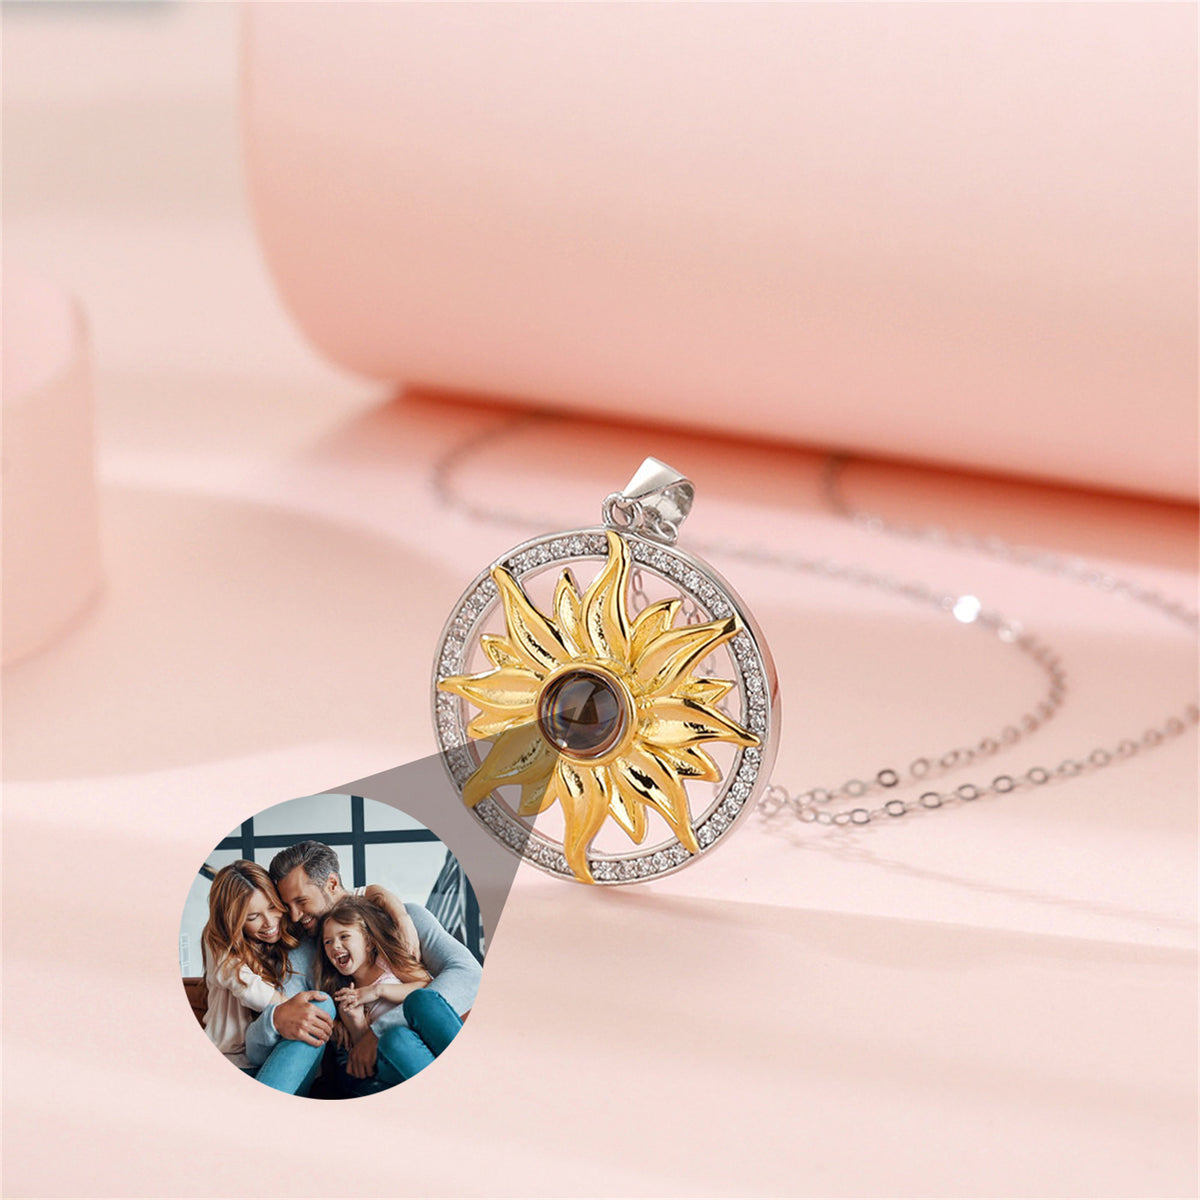 Personalized Sunflower Projection Necklace, Custom Memorial Picture Pendant